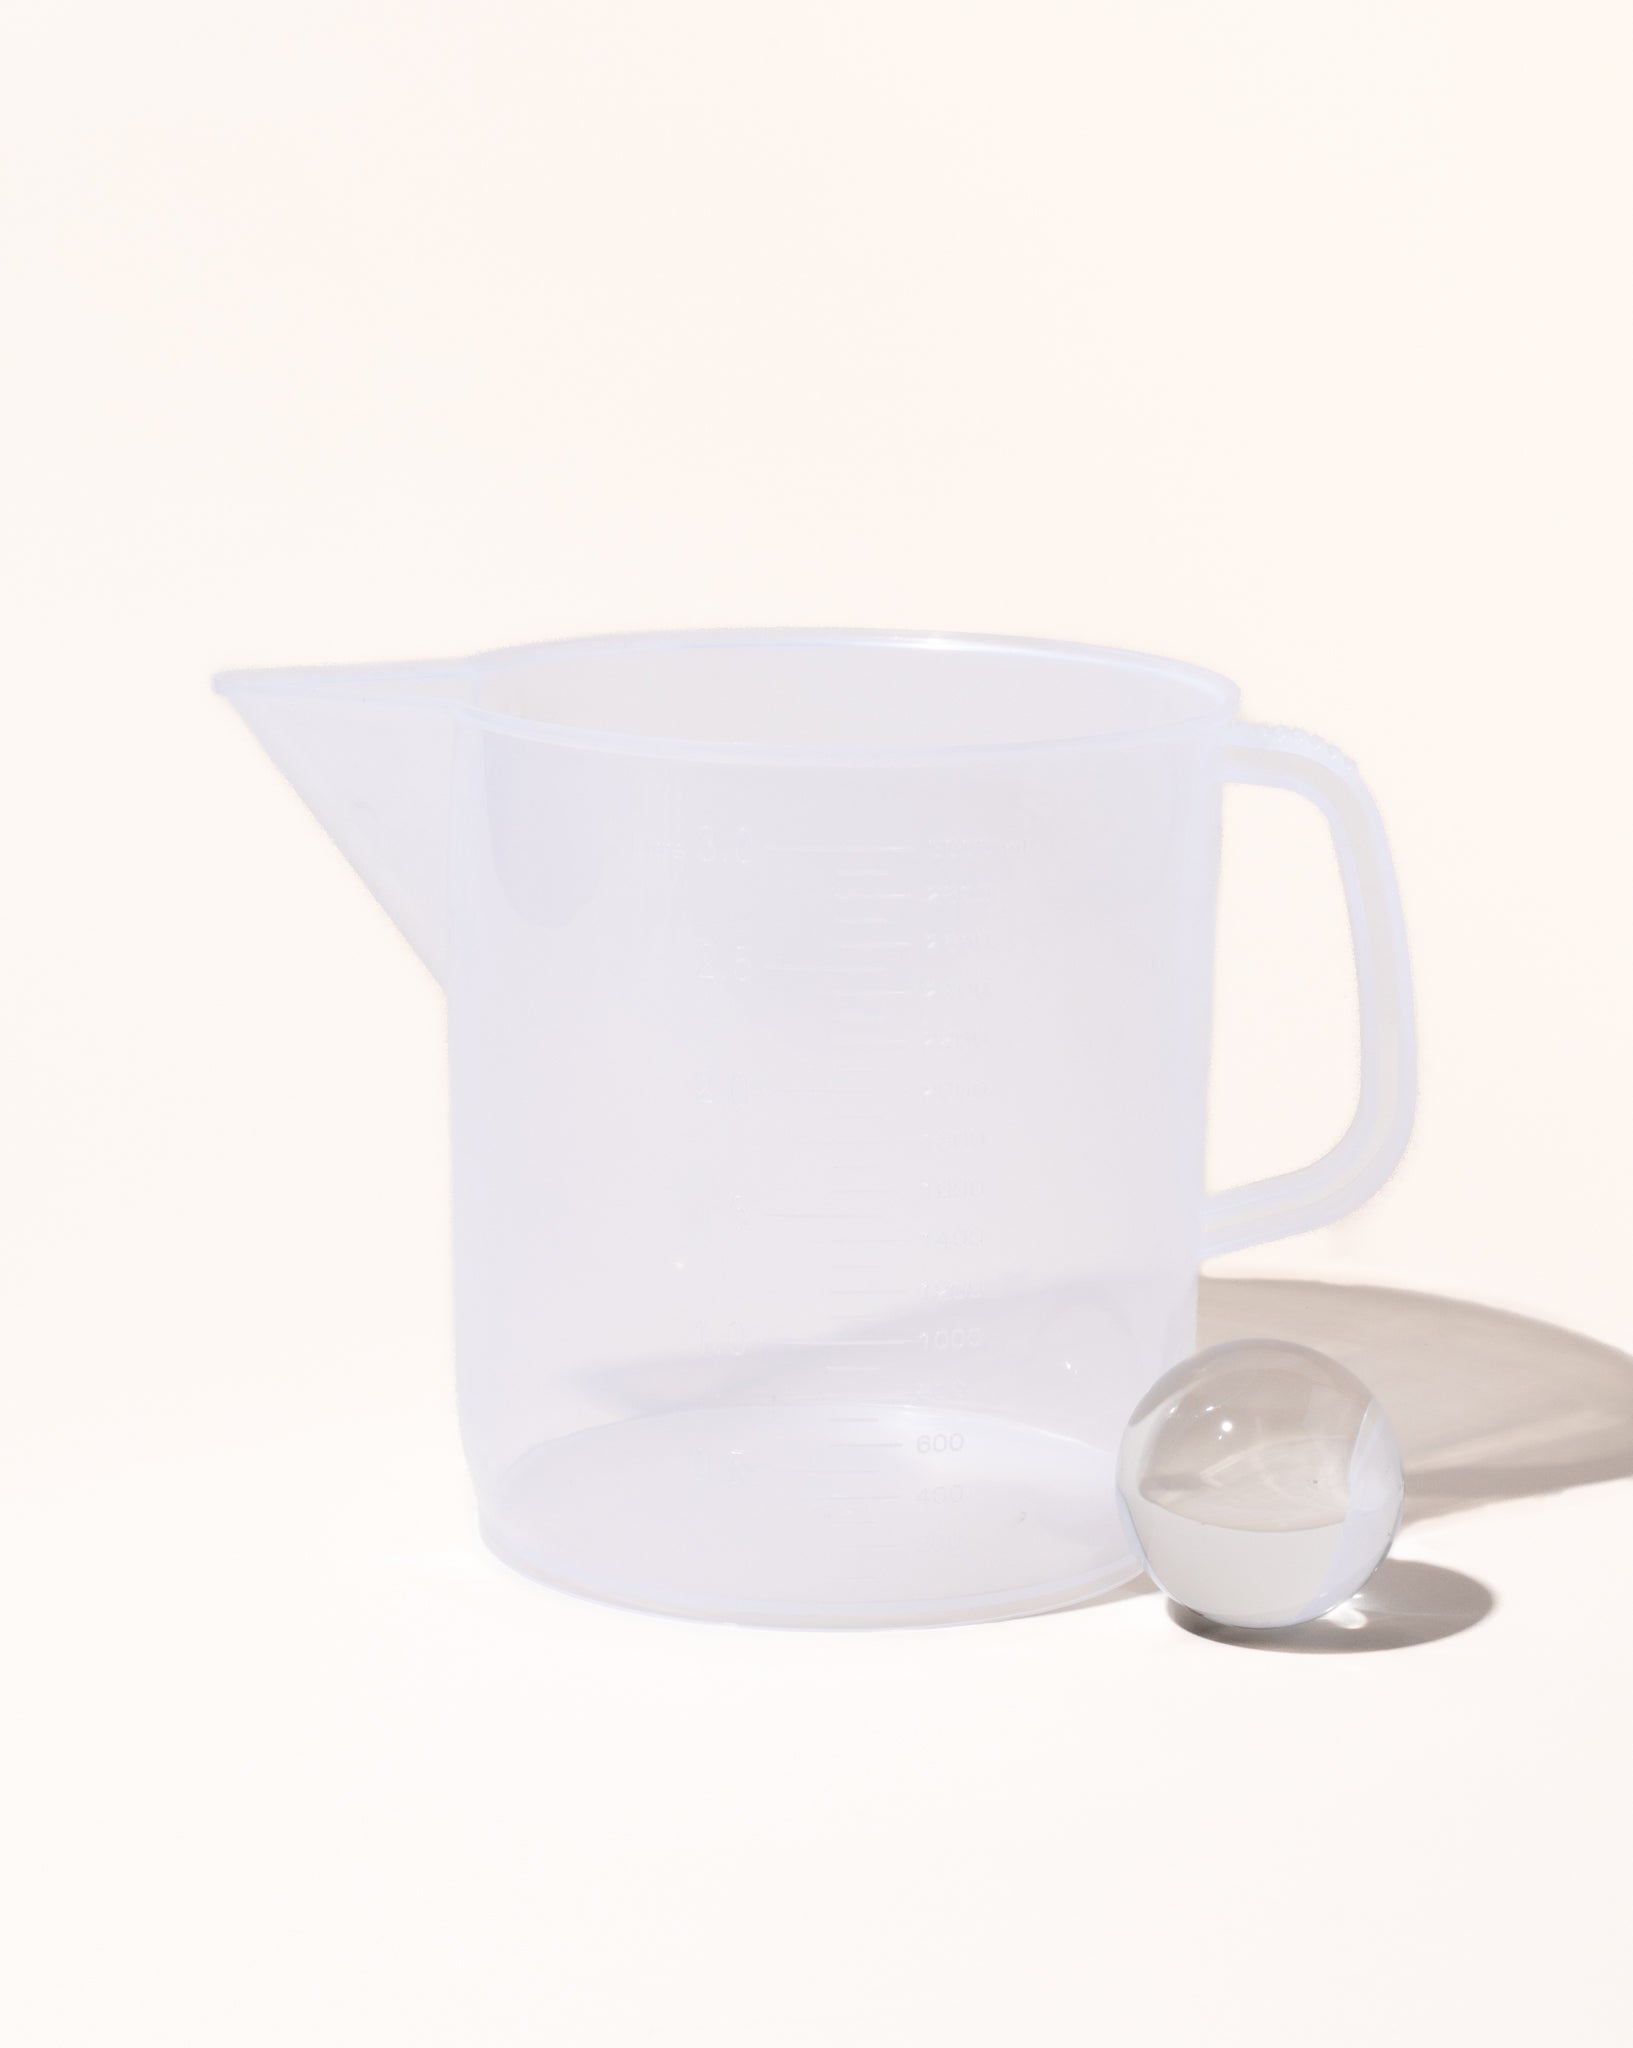 3000ml pouring pitcher - Makesy